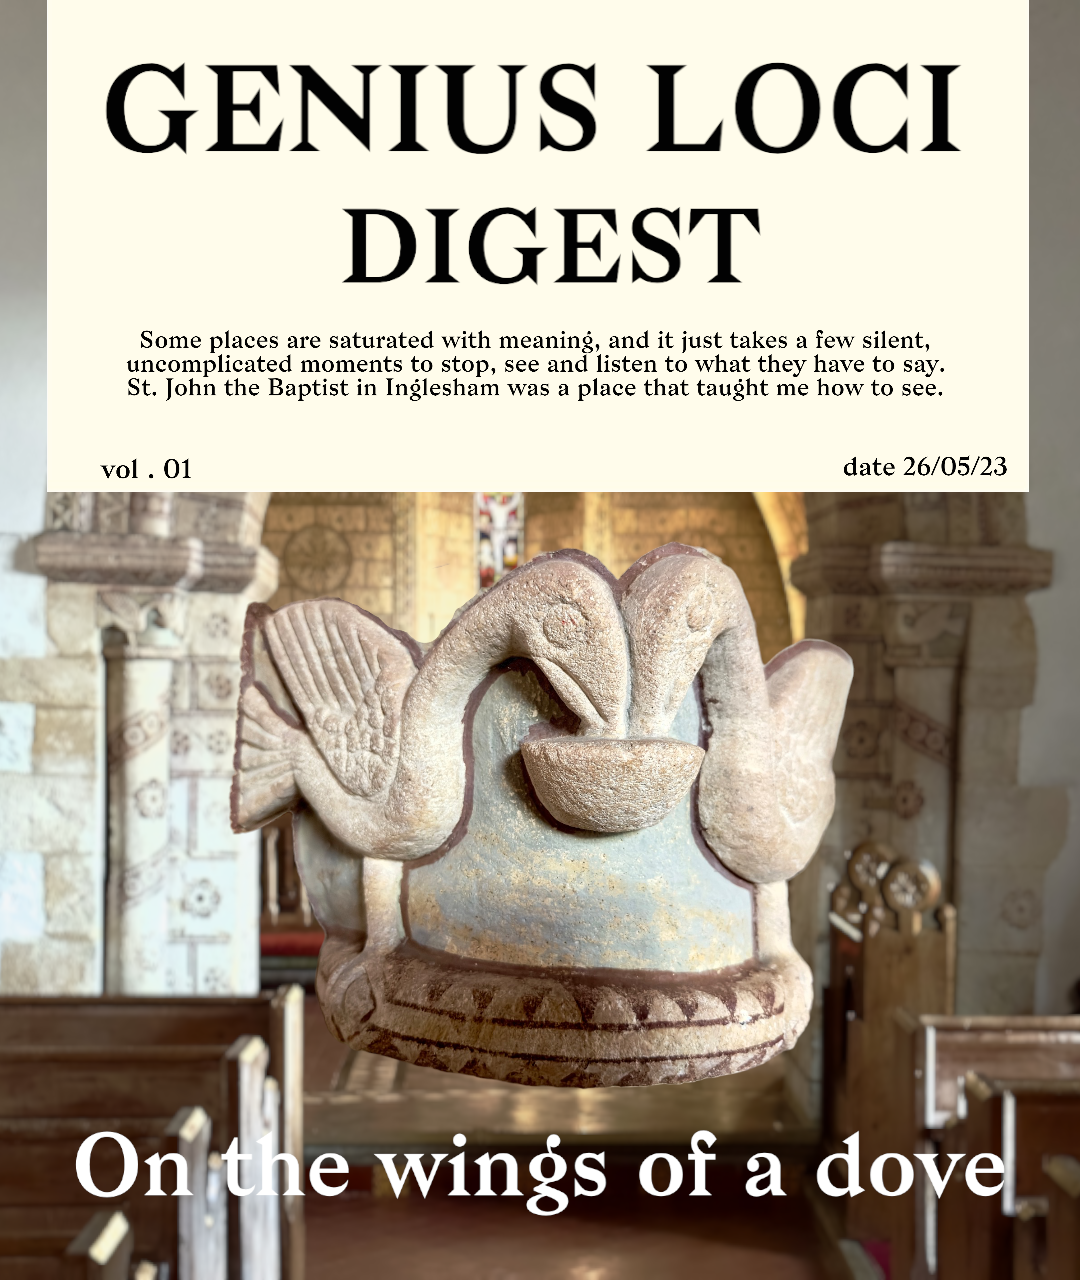 Andy Marshall's Genius Loci Digest 26 May 2023